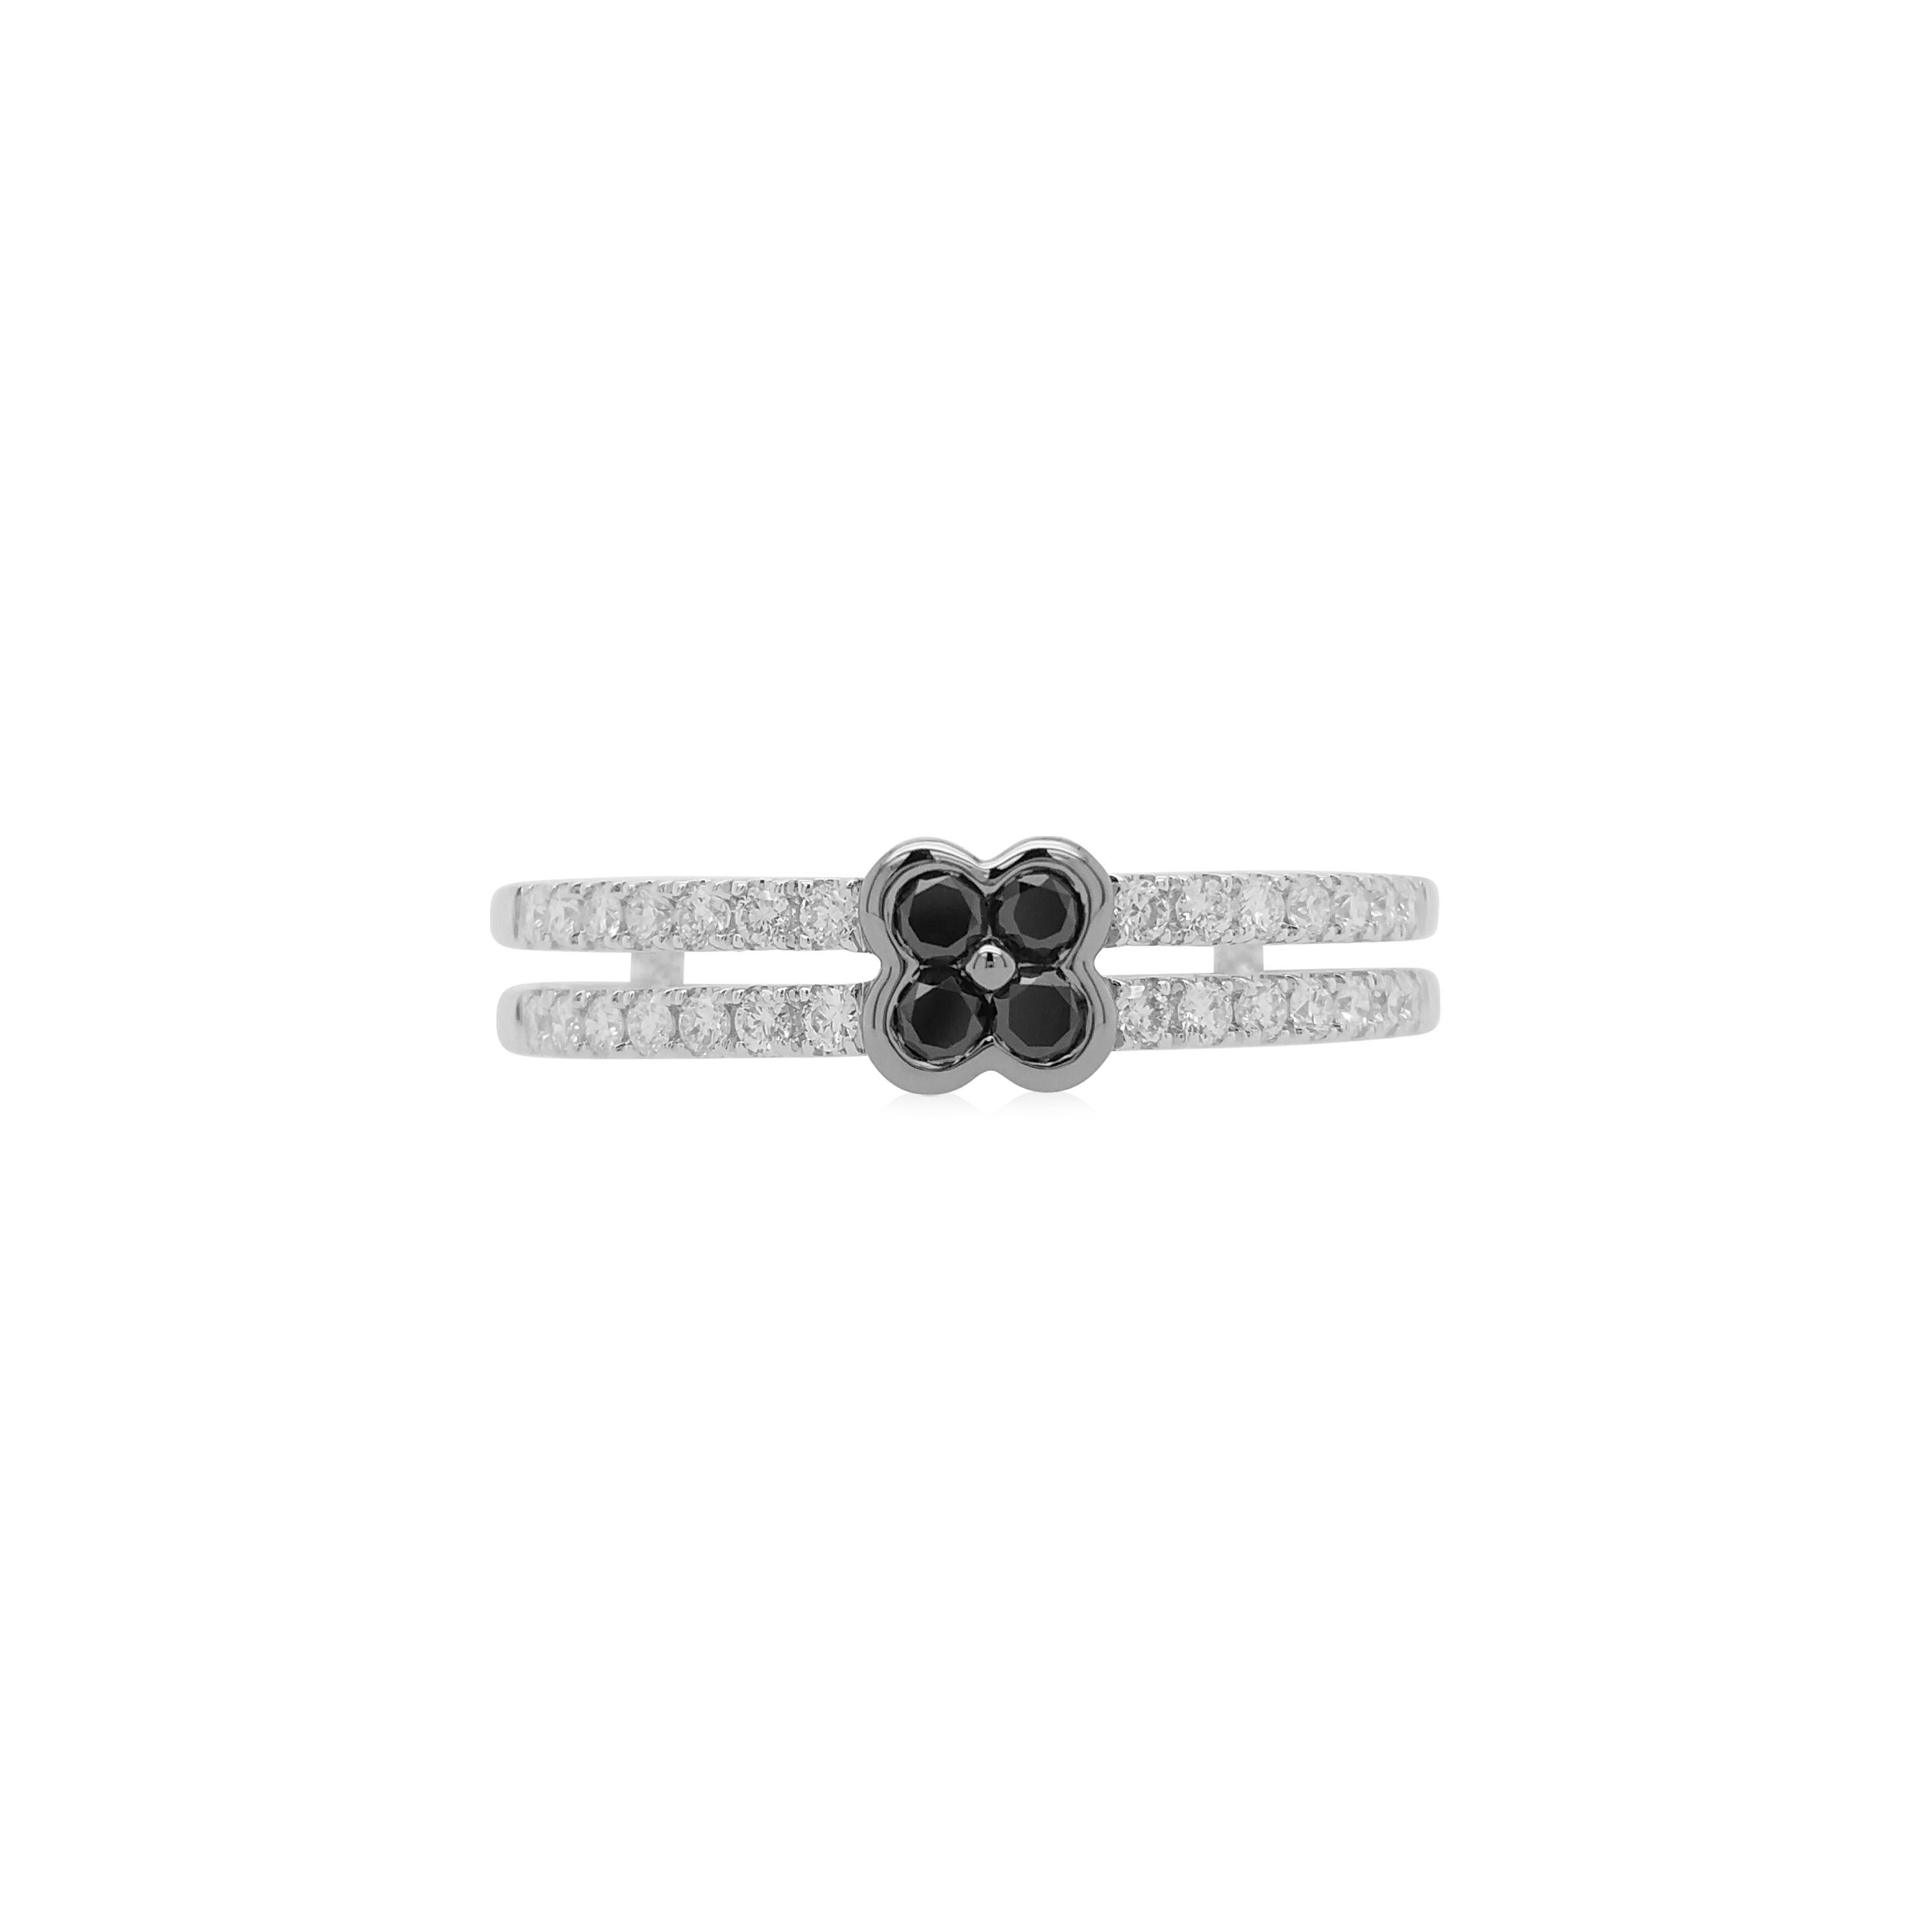 An elegant ring with brilliant cut Black diamonds styled in white diamonds and 18K gold band.

Black Diamonds- 0.11 cts
White Diamonds- 0.21 cts 
18K White Gold

HYT Jewelry is a privately owned company headquartered in Hong Kong, with branches in